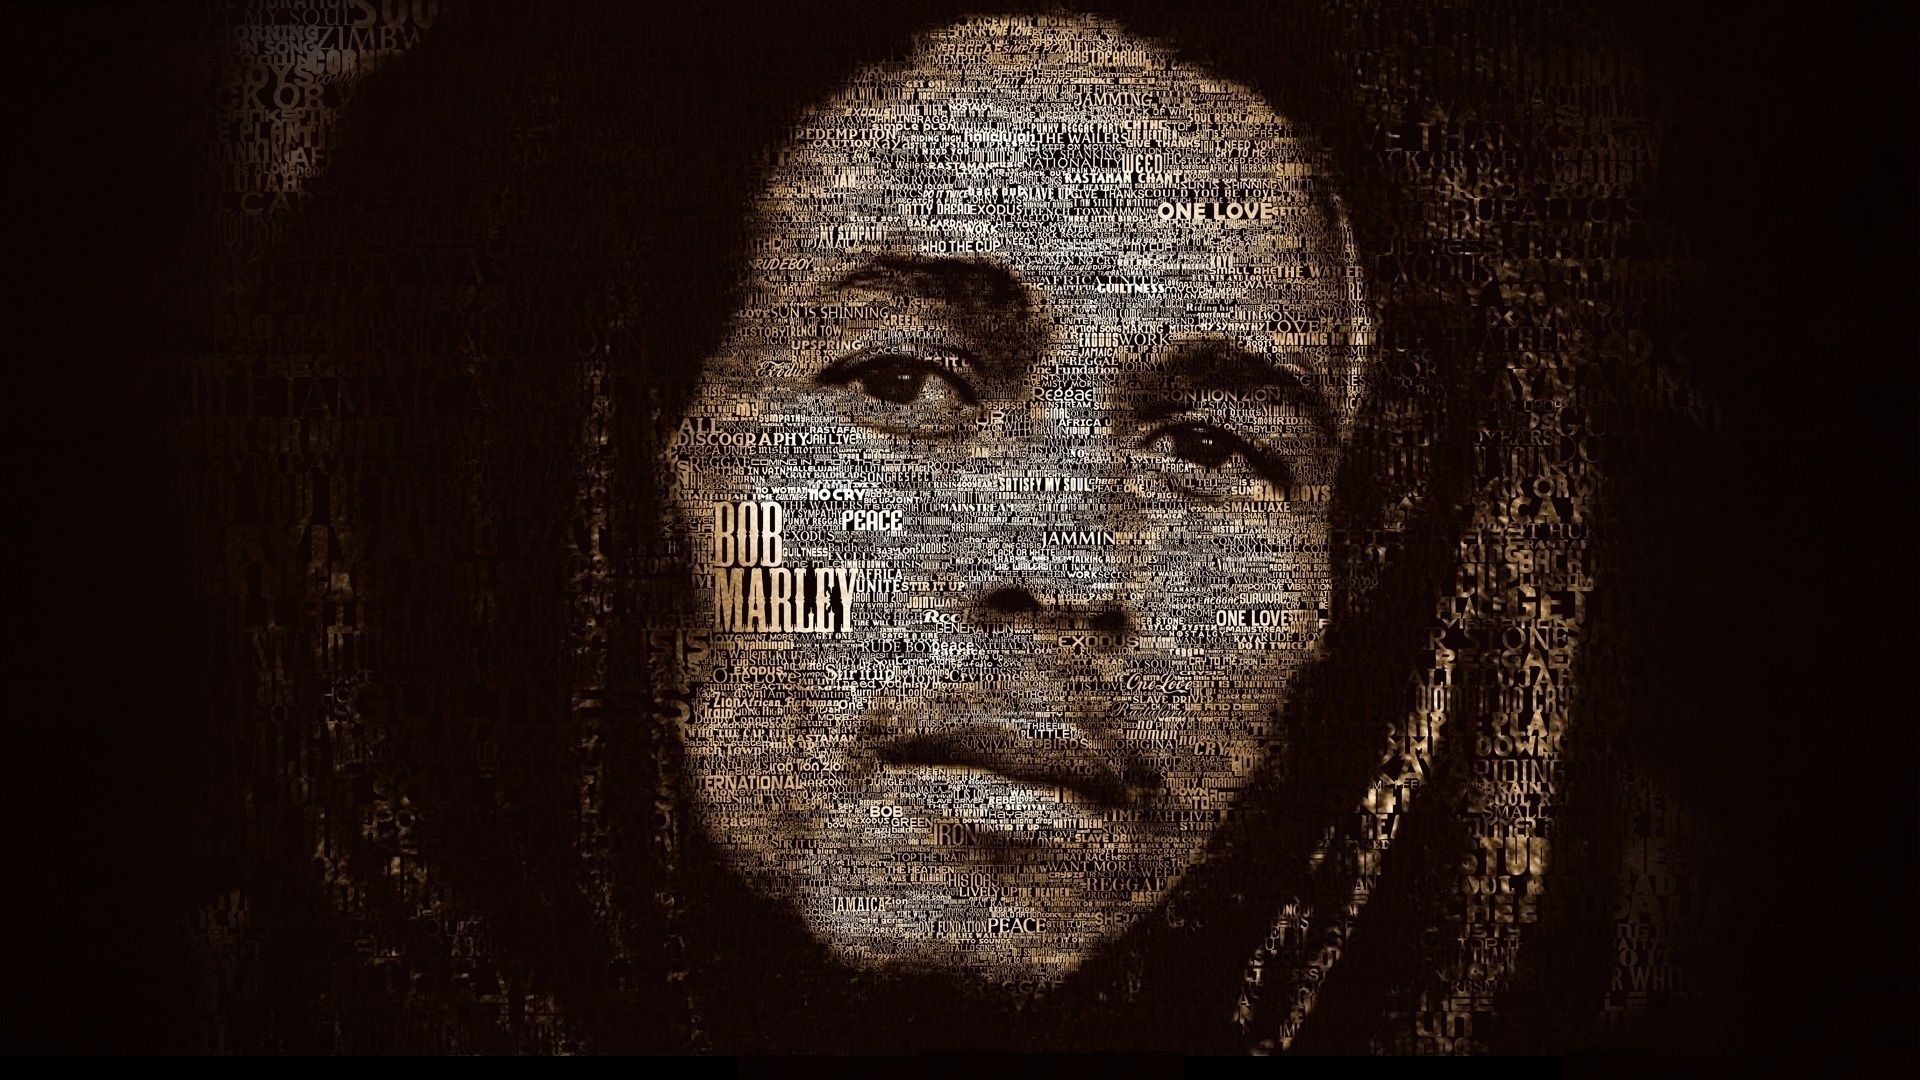 Bob Marley: The album ‘Exodus’ (1977), stayed on the UK’s music chart for 56 consecutive weeks. 1920x1080 Full HD Wallpaper.